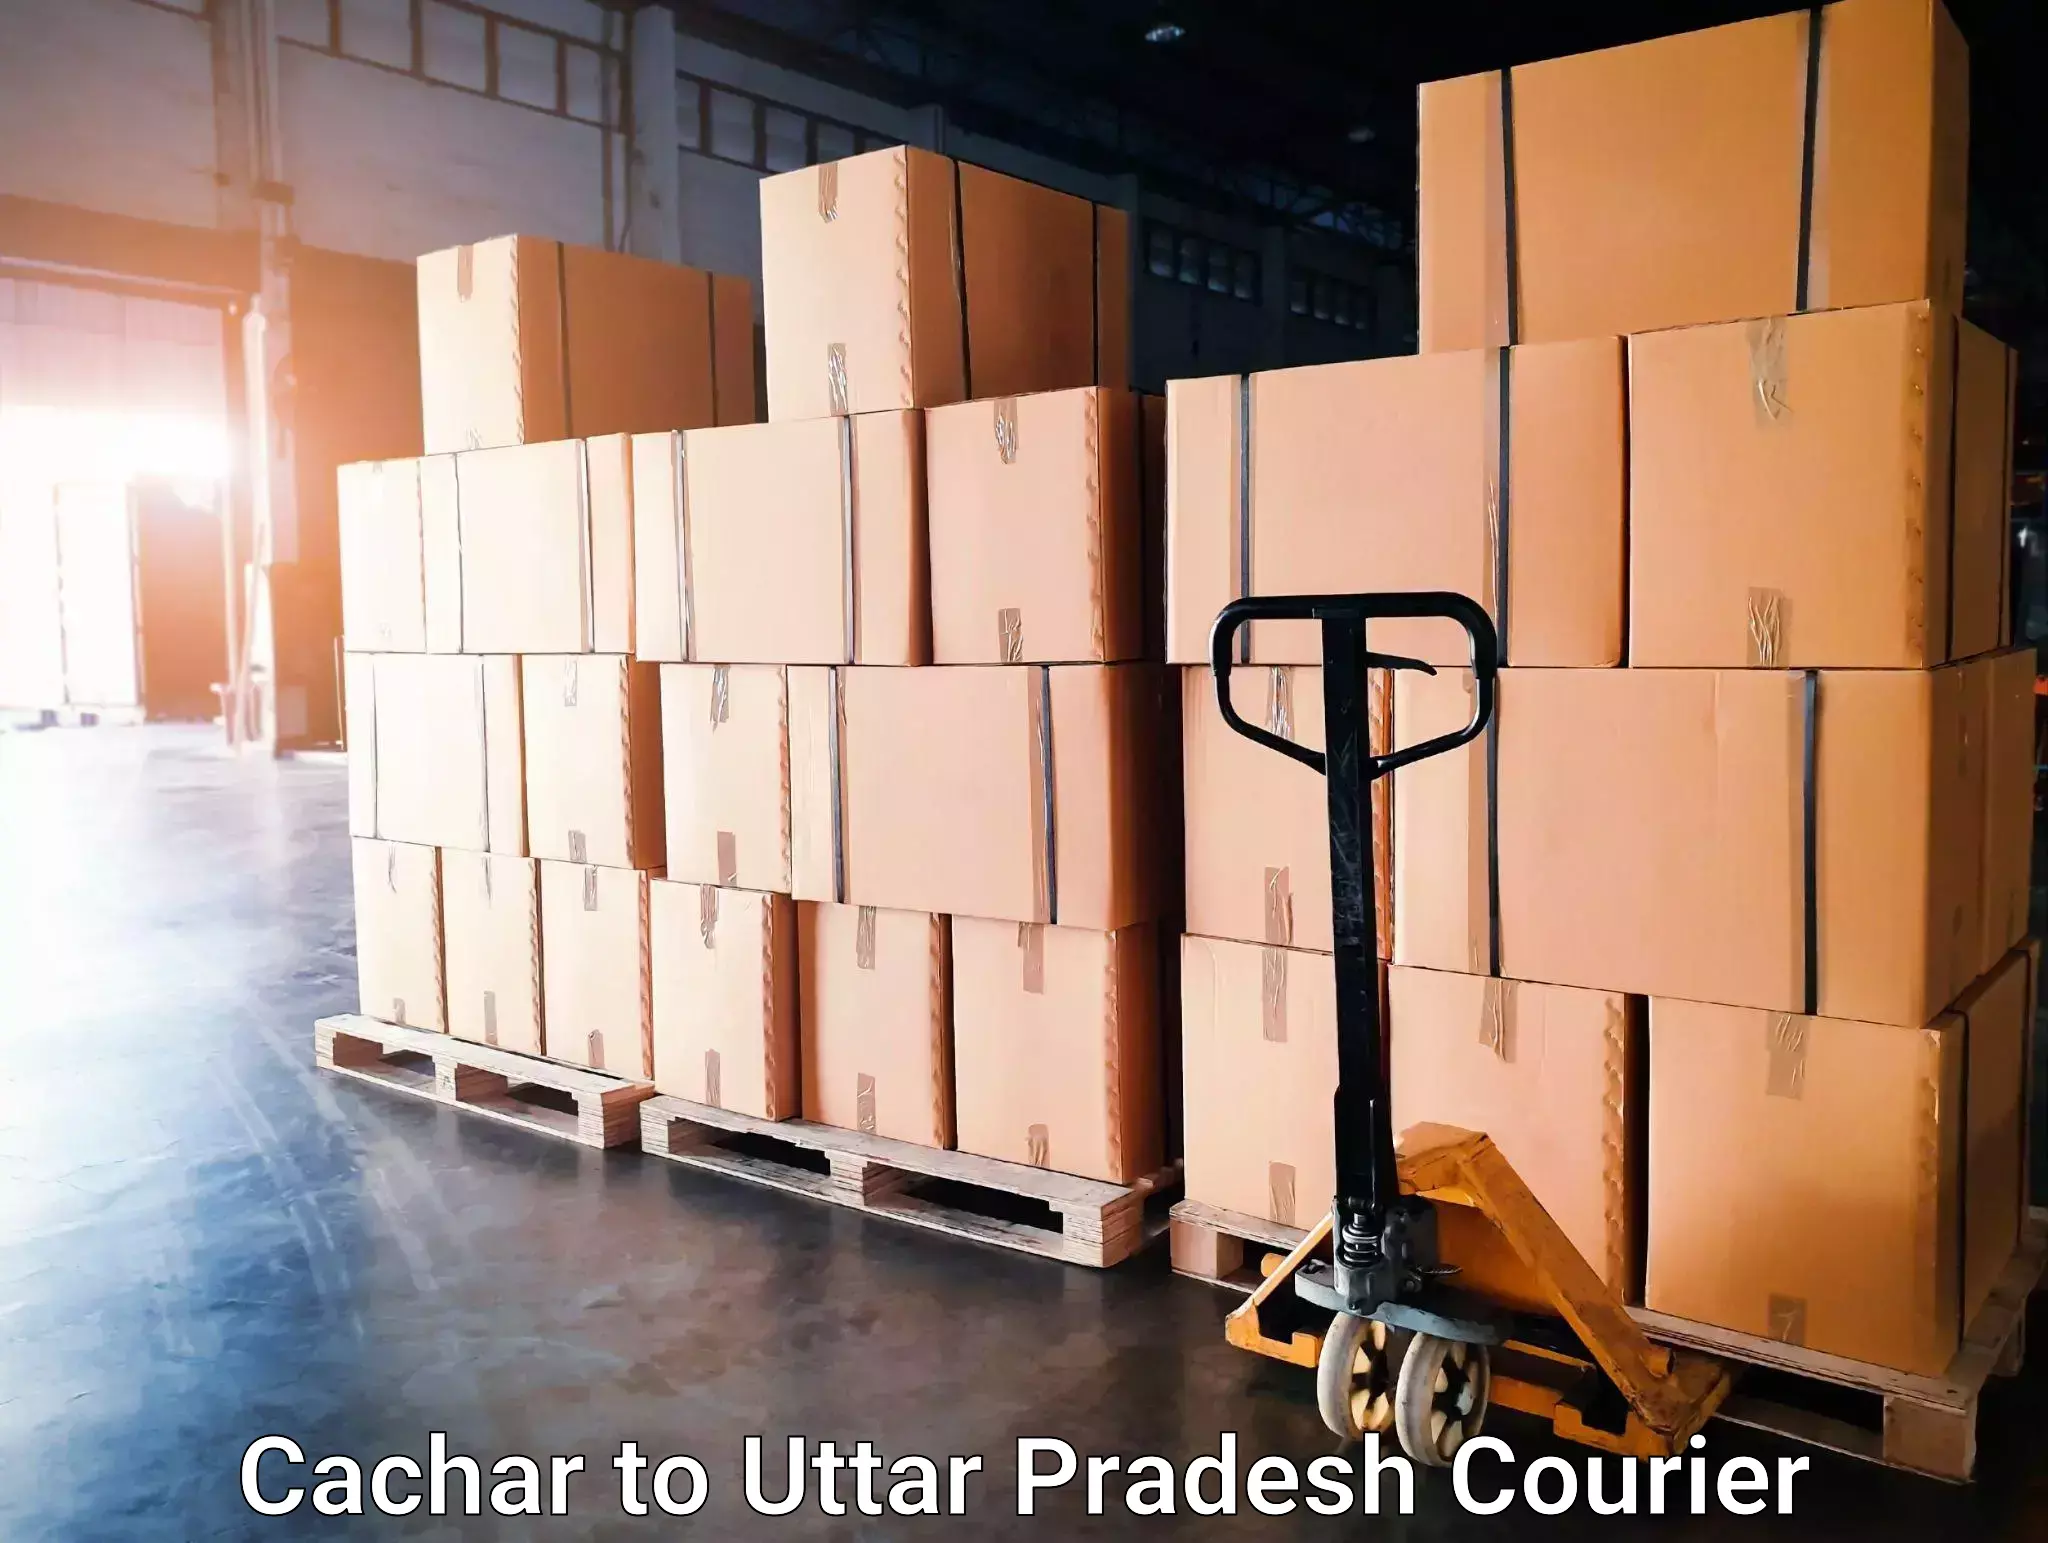 Courier tracking online Cachar to Ghaziabad